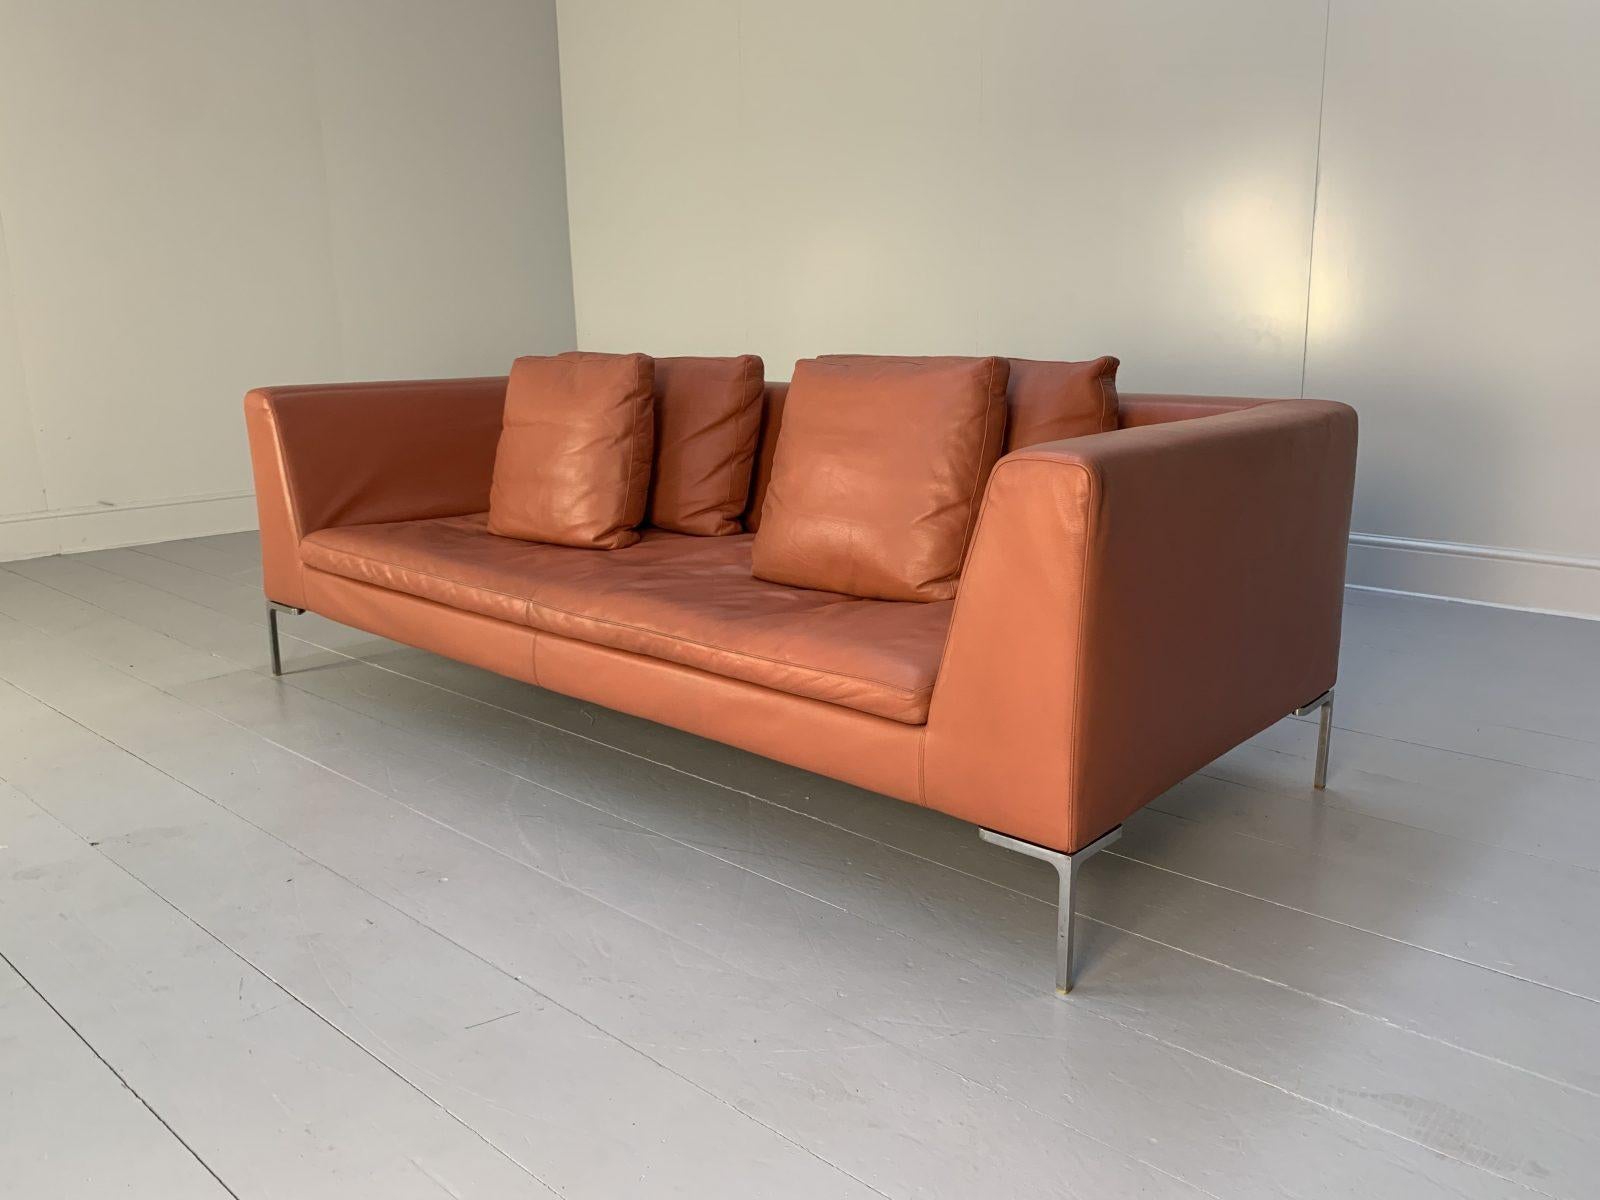 Contemporary B&B Italia “Charles” Sofa – “CH230” 3-Seat – In Dark Pink “Gamma” Leather For Sale